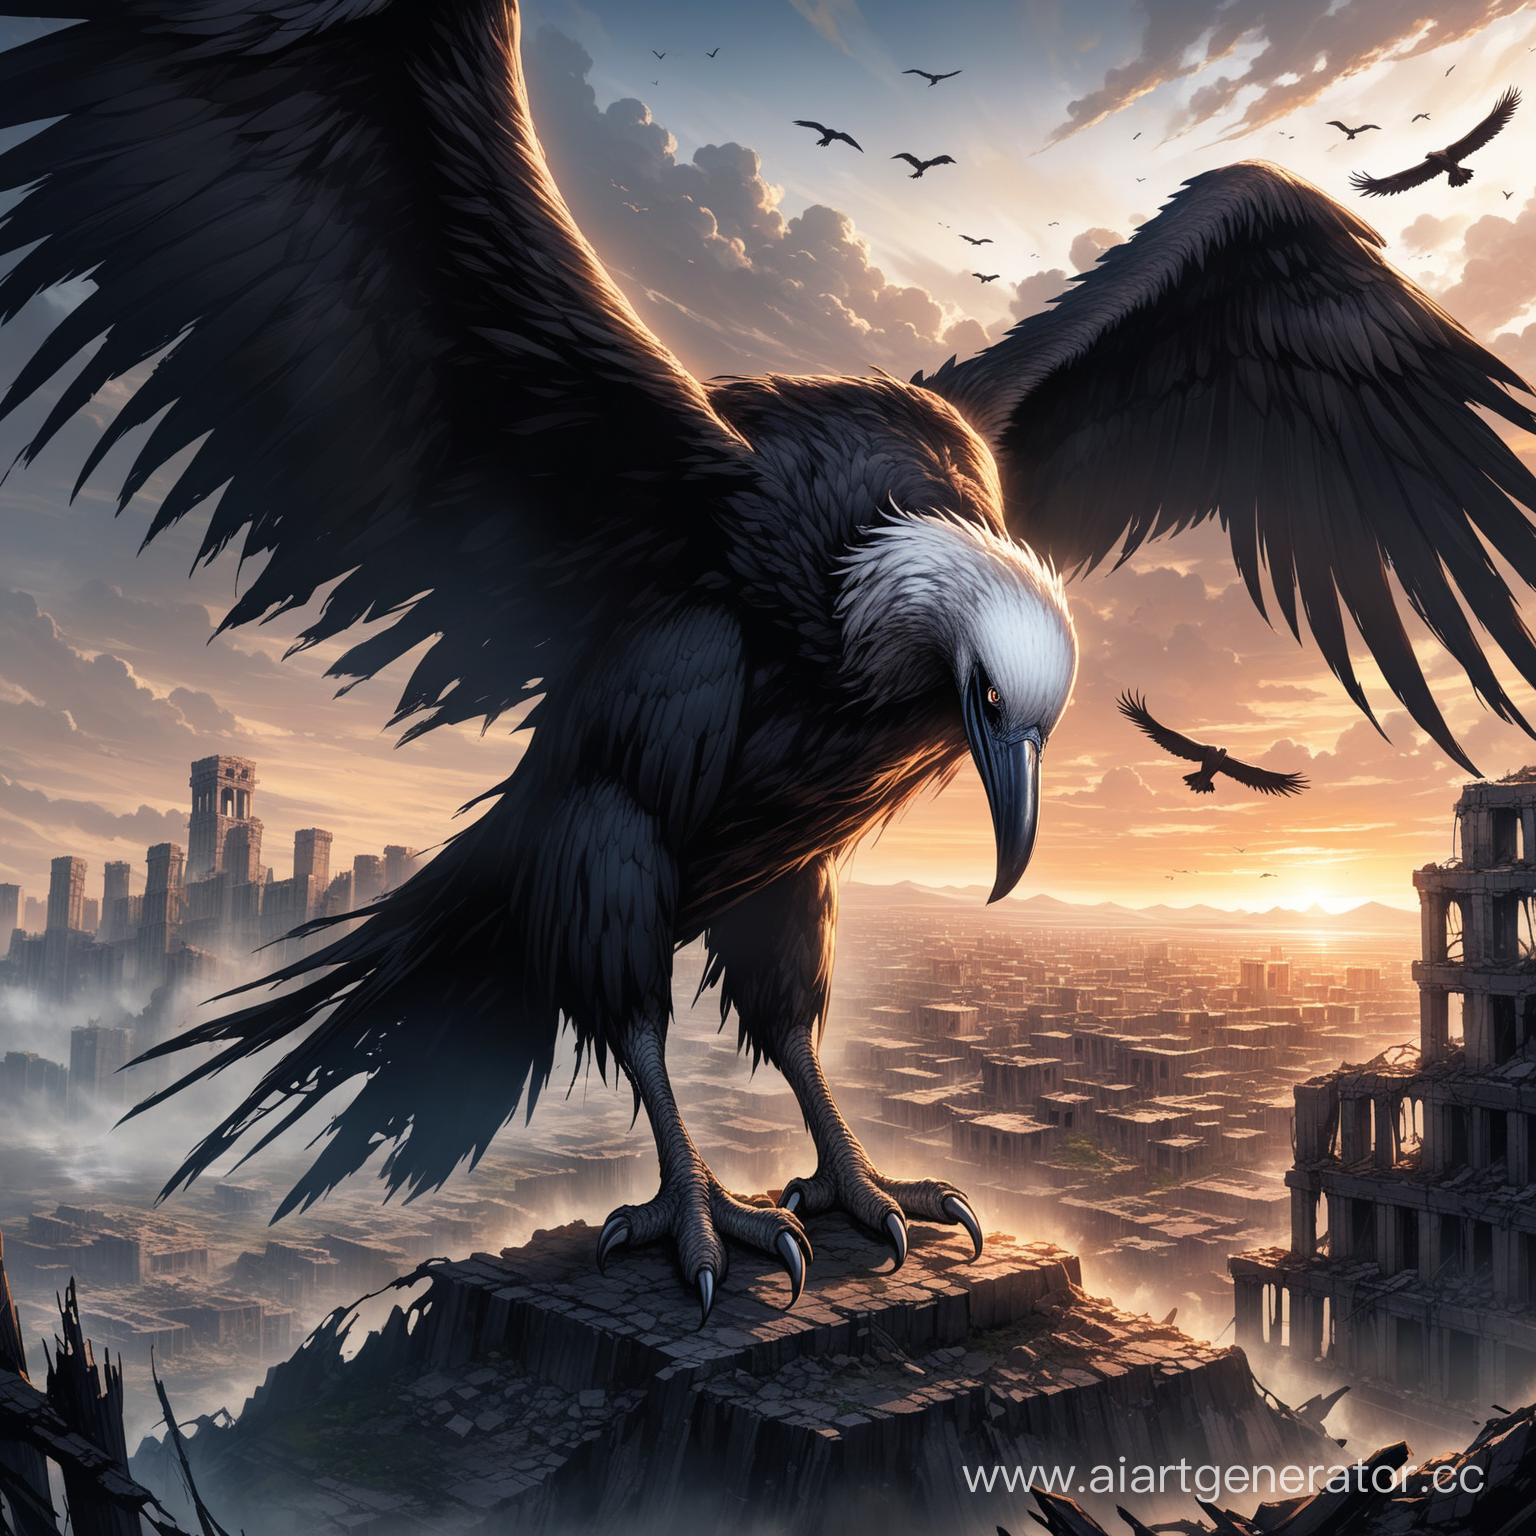 A giant humpback bird that is a harbinger of the apocalypse; looks like a vulture; wings that are twice as big as himself; a long beak; he has no eyes, they are torn out, instead he has one big eye in his beak; giant paws with claws; stands on the dying earth, around him the ruins of the city